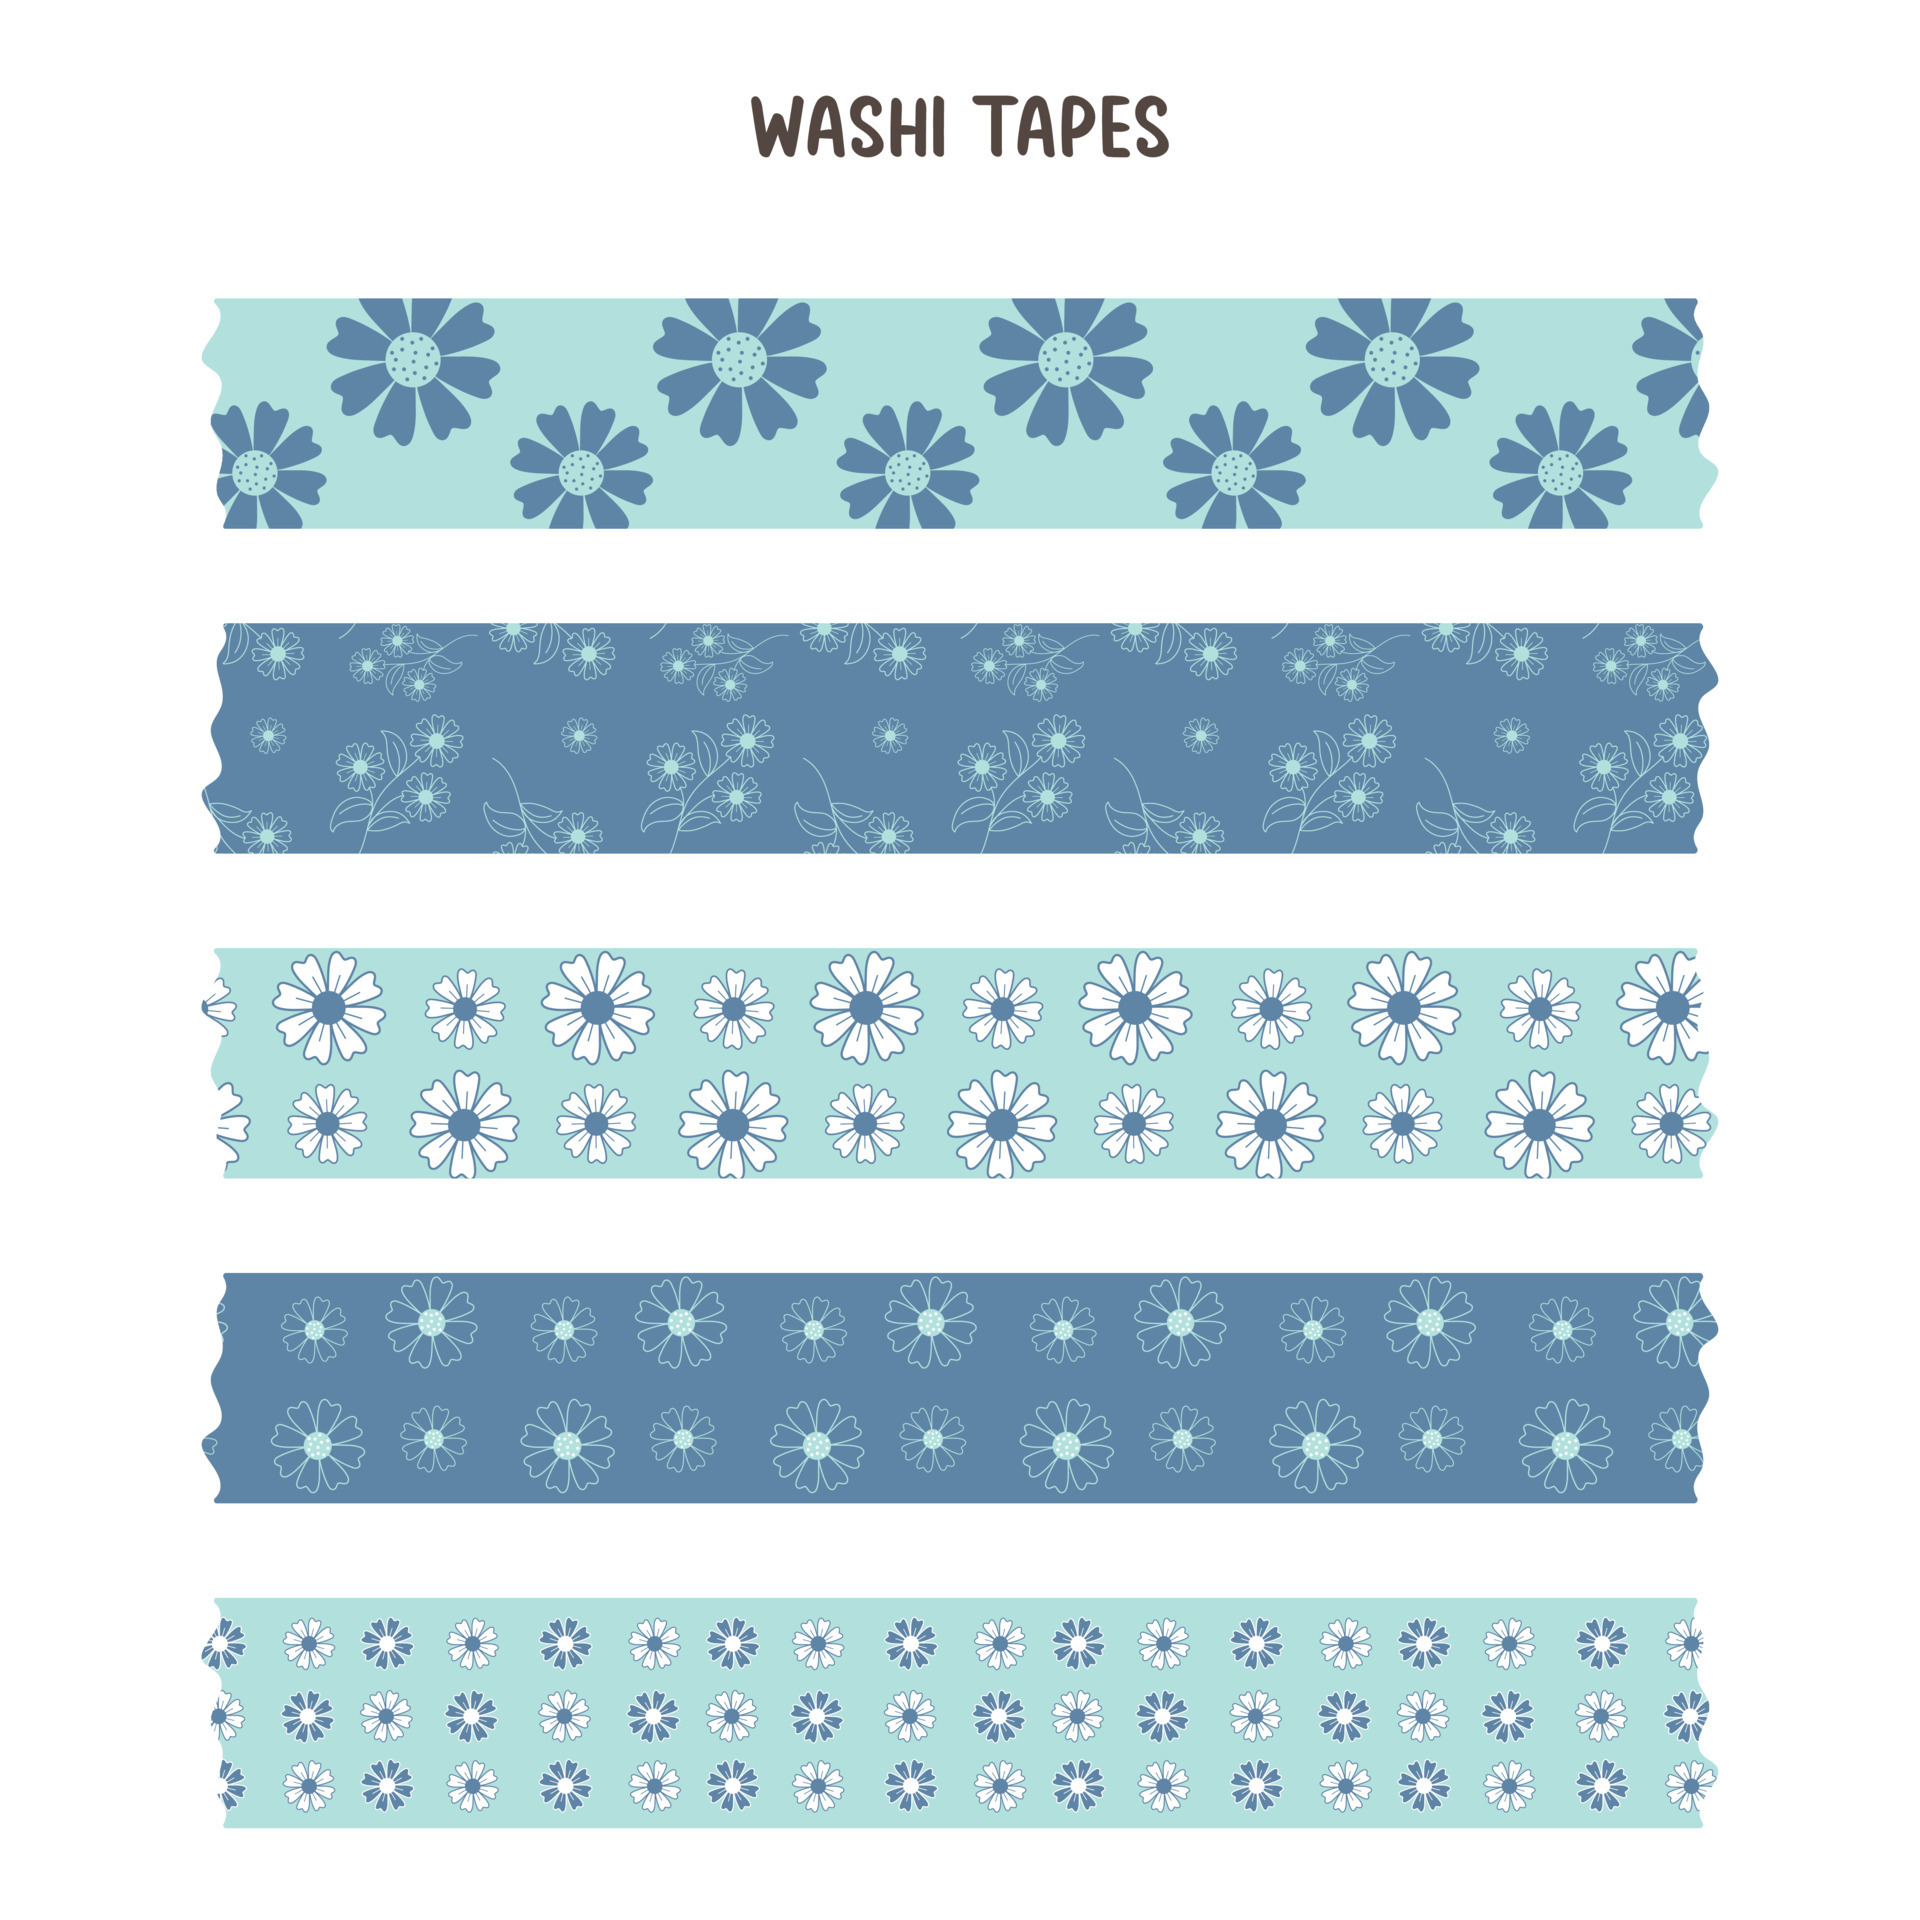 https://static.vecteezy.com/system/resources/previews/016/467/160/original/set-of-a-decorative-washi-tape-illustration-of-blue-pattern-washi-tape-free-vector.jpg